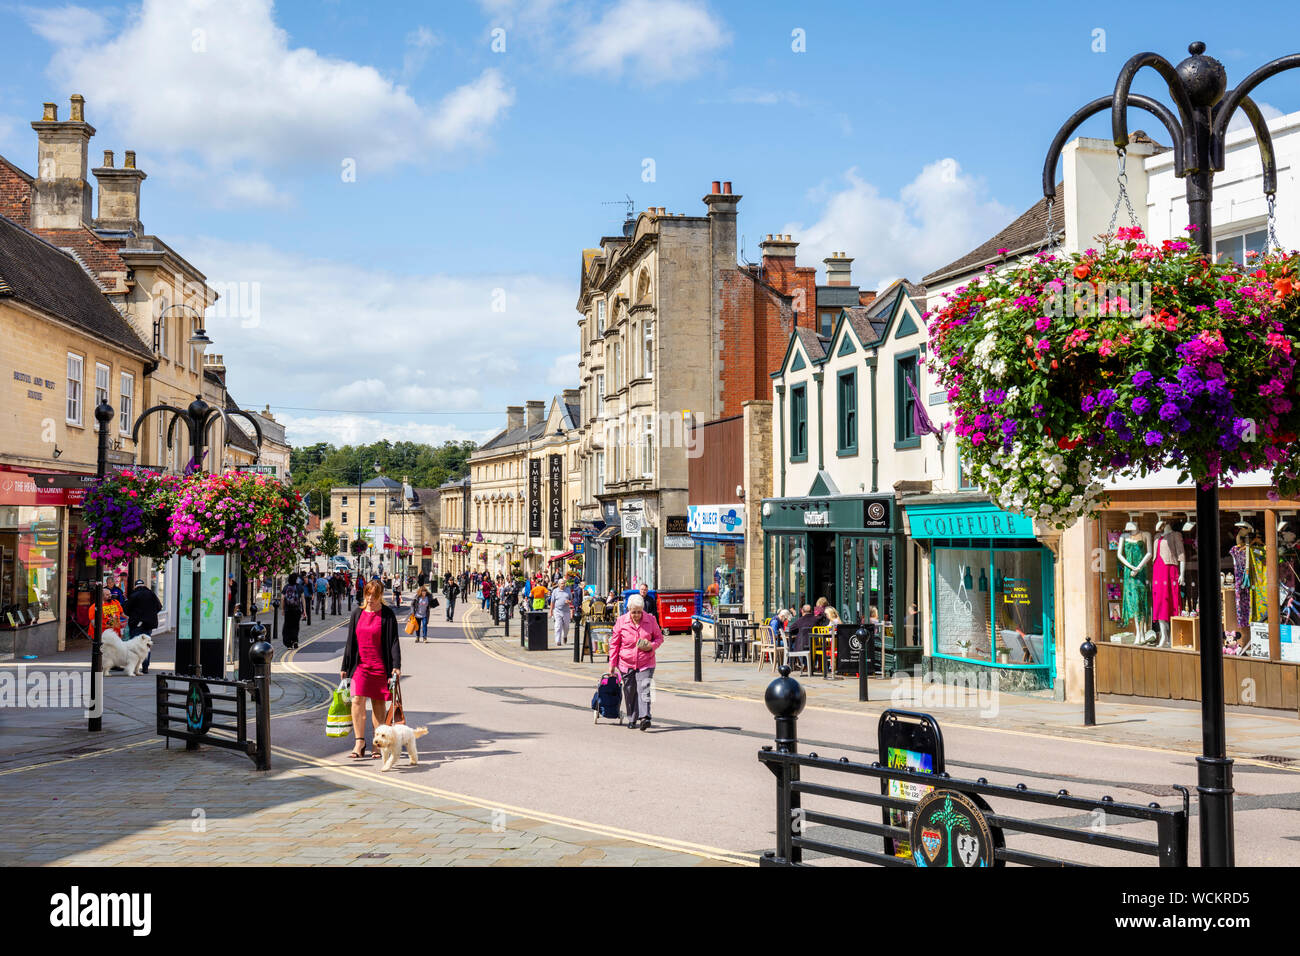 Chippenham High Street shops with people shopping Wiltshire England uk gb Europe Stock Photo